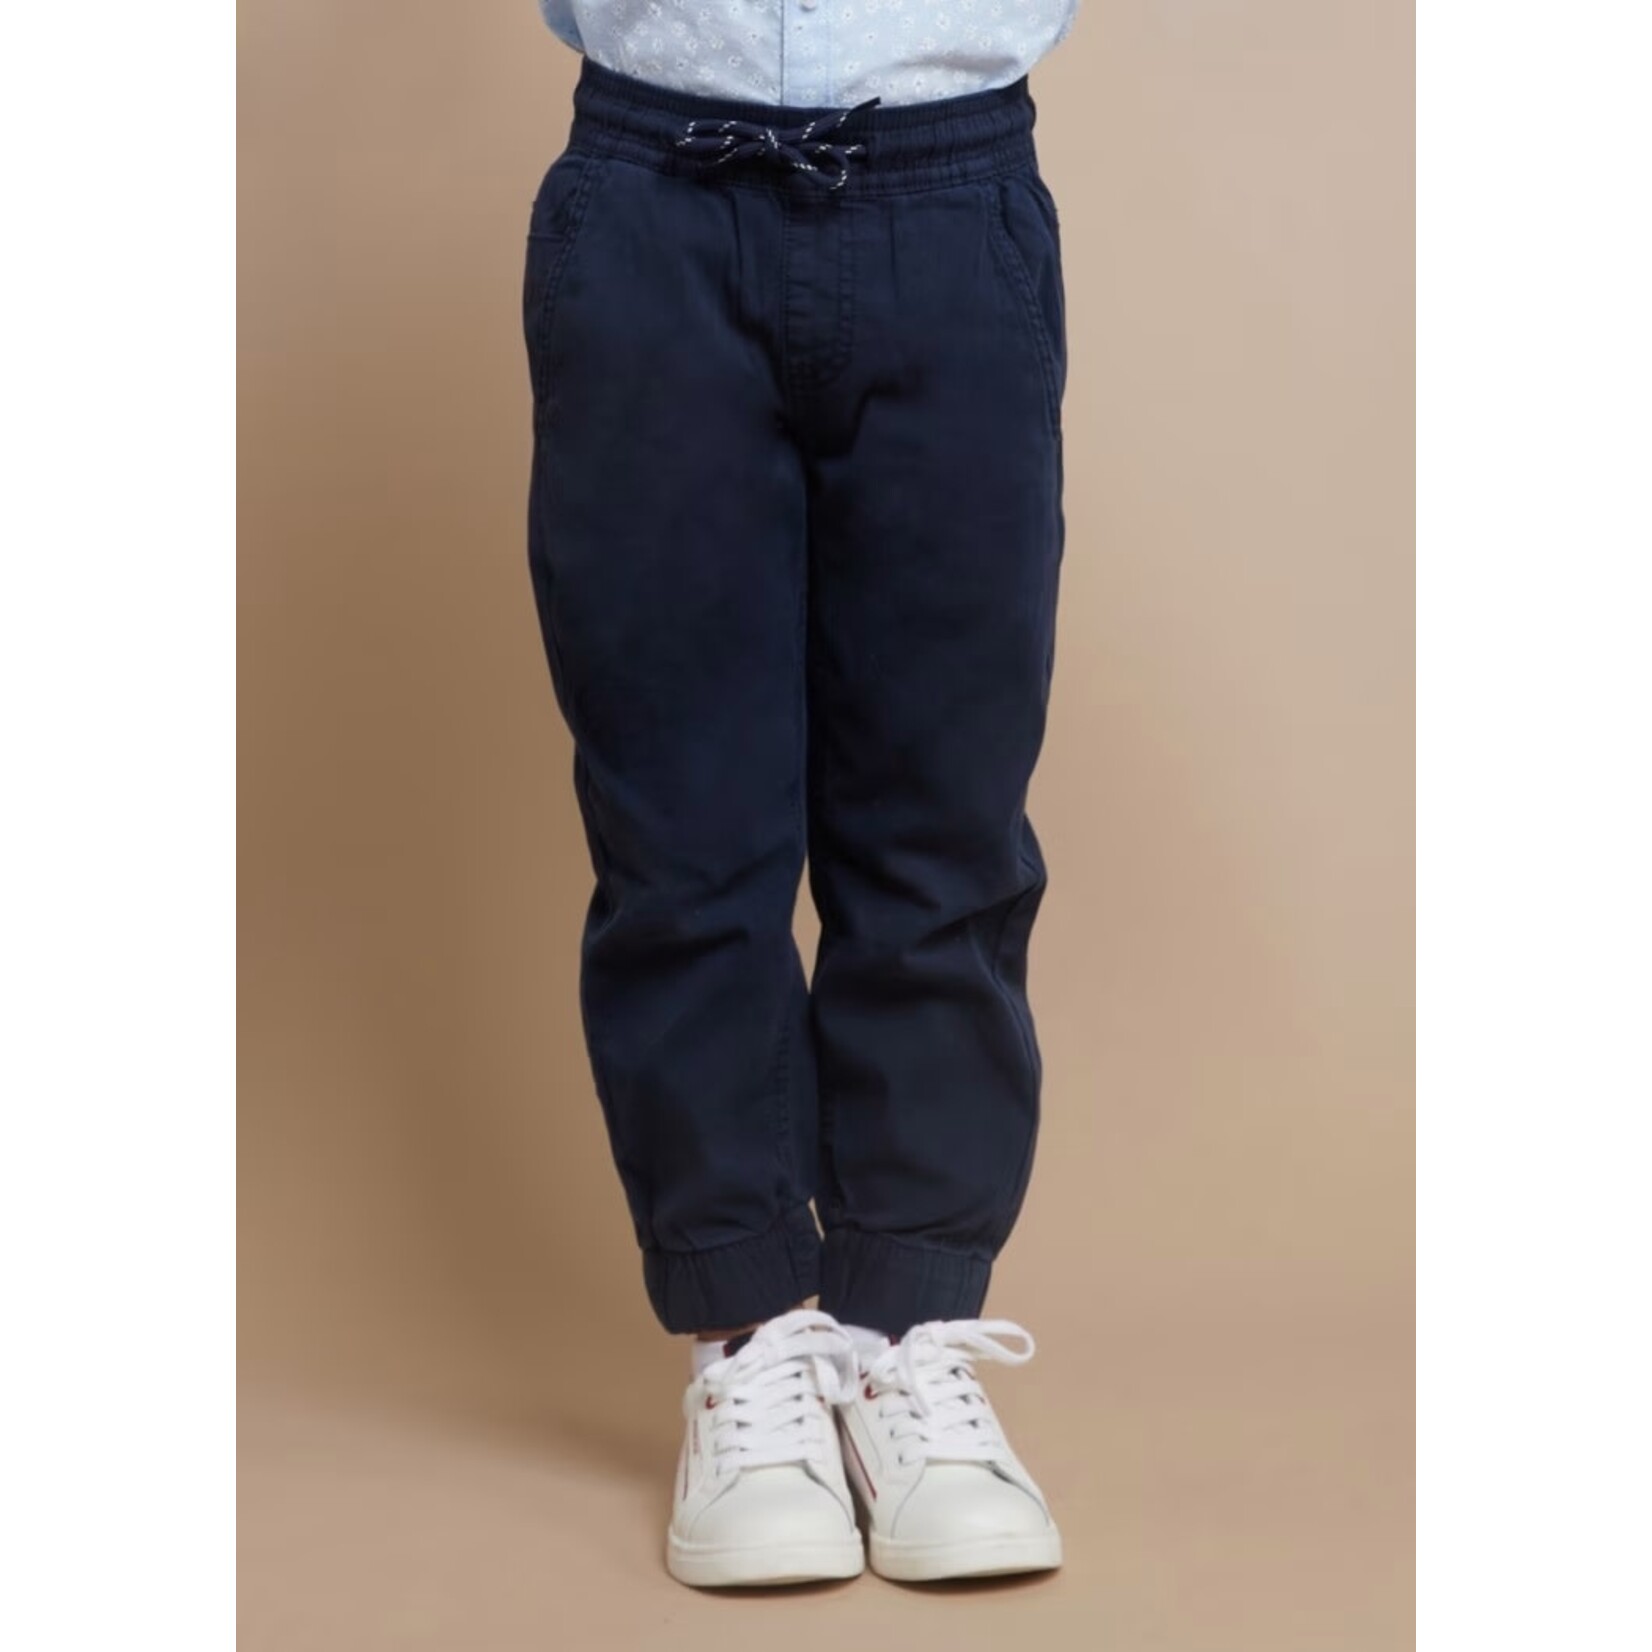 Mayoral MAYORAL - Navy Twill Jogger Pants with Adjustable Drawstring 'Skater Fit'